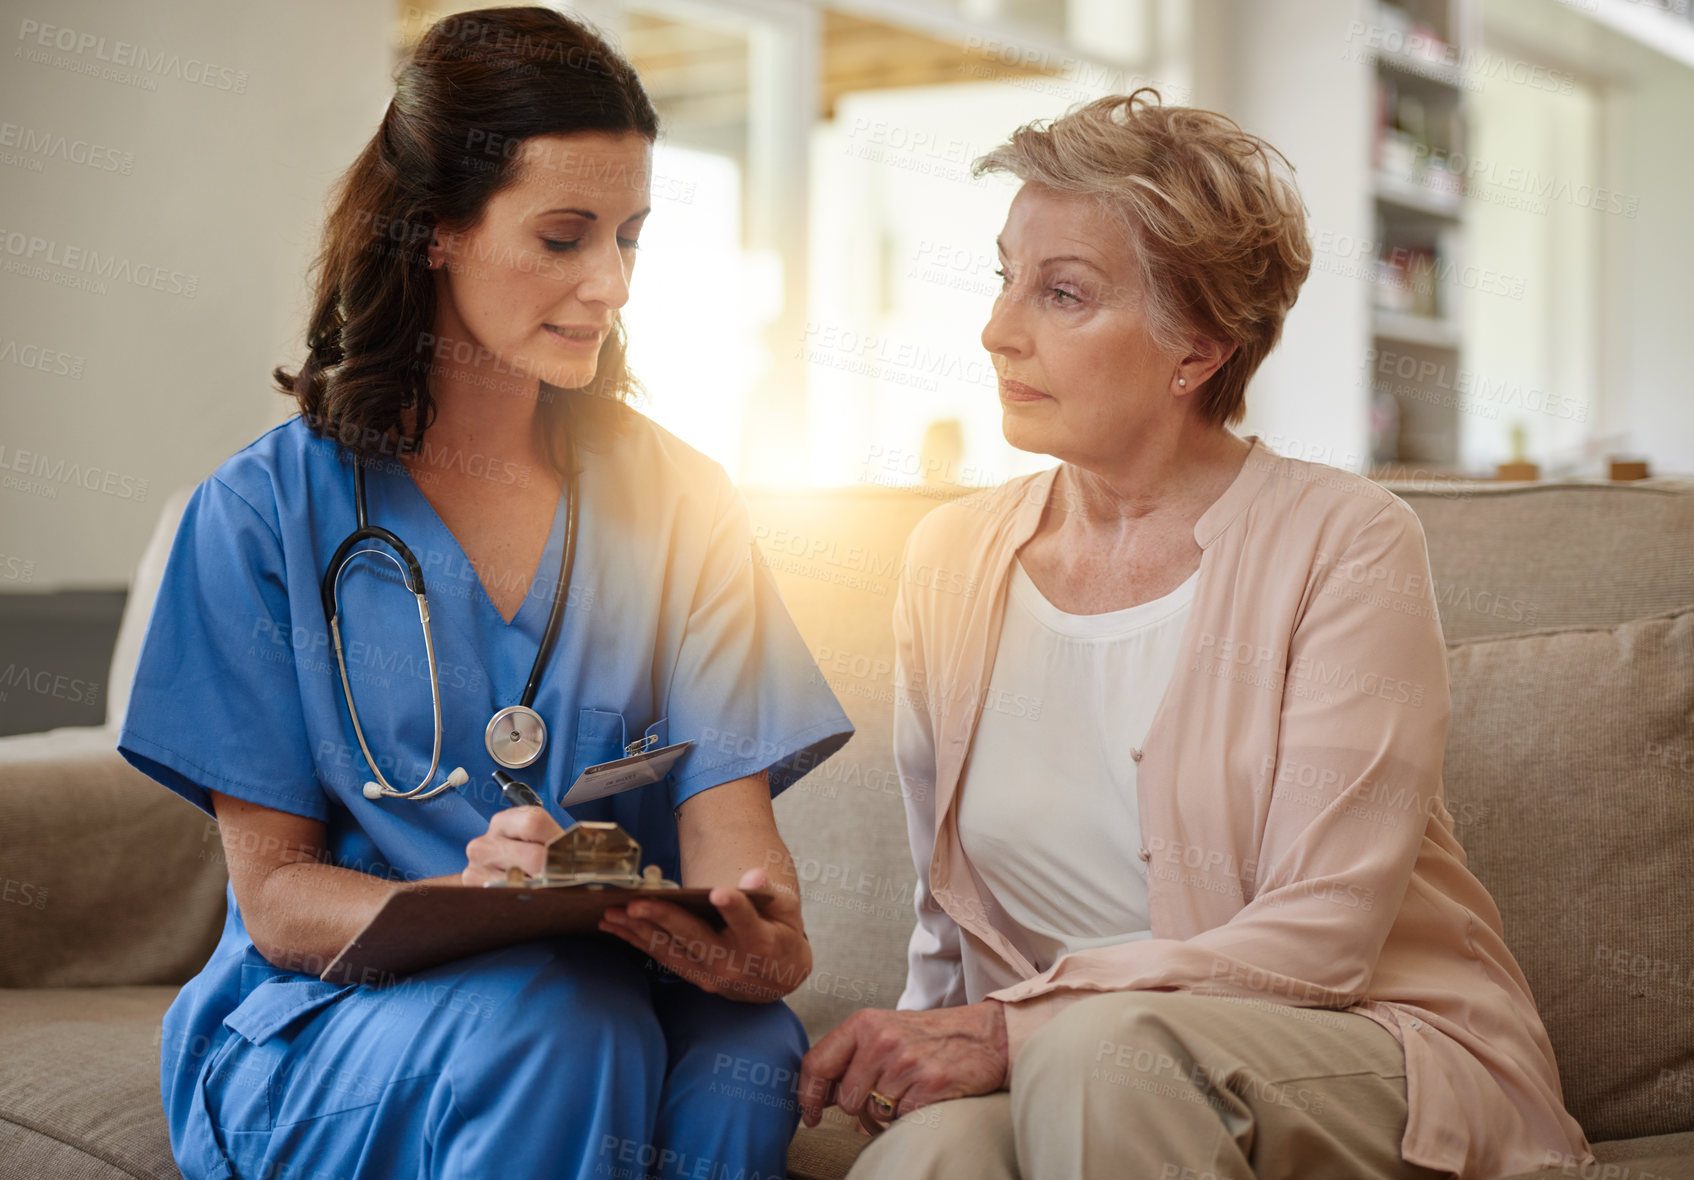 Buy stock photo Shot of a senior woman talking with a nurse in assisted living facility